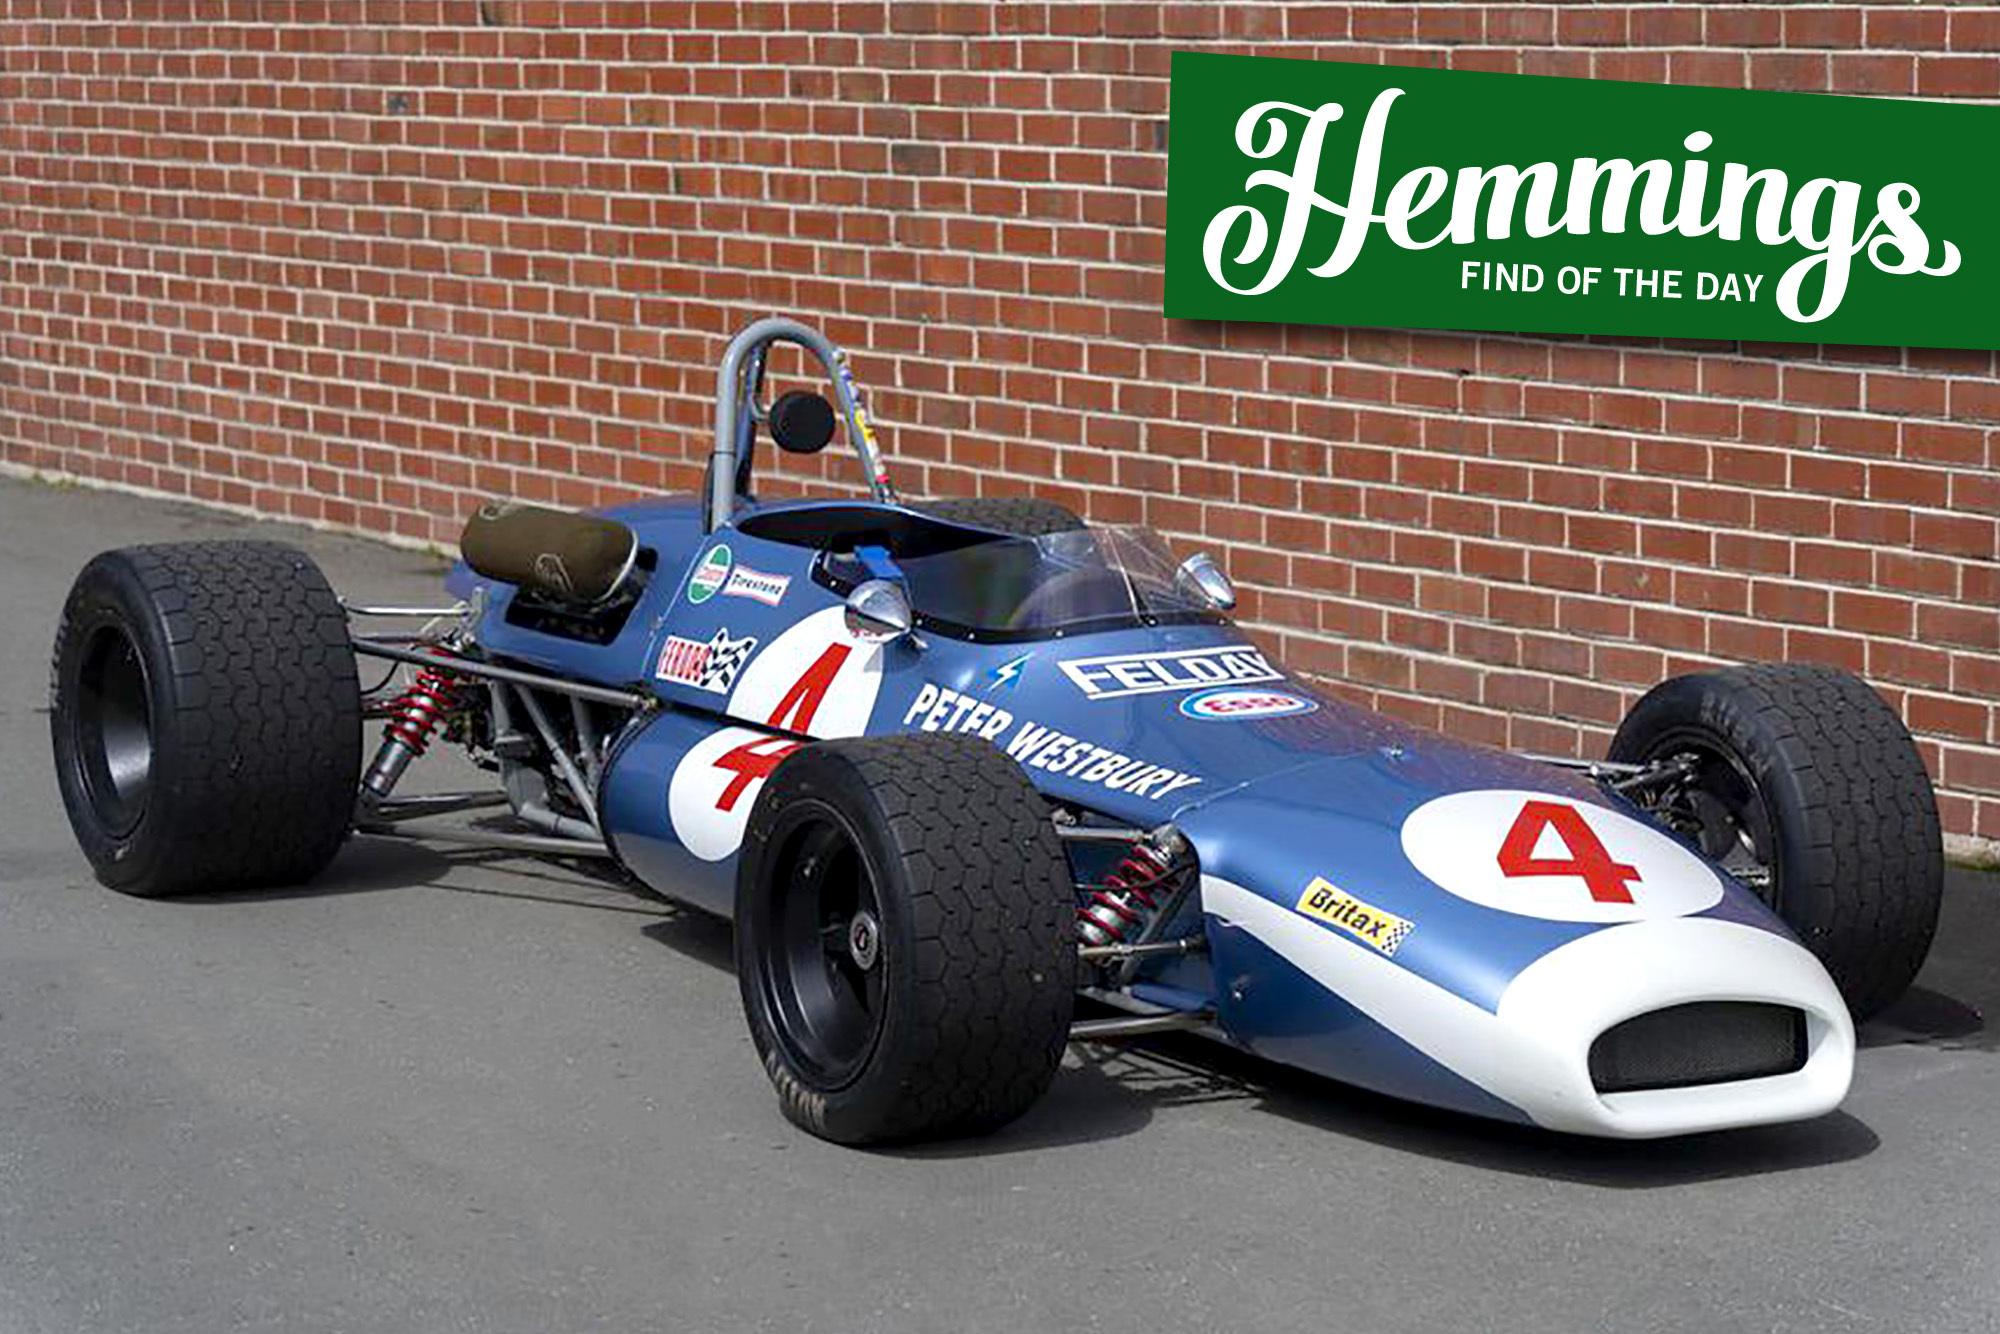 Serviced and documented 1969 Brabham BT30 might just perform better today than when it was new